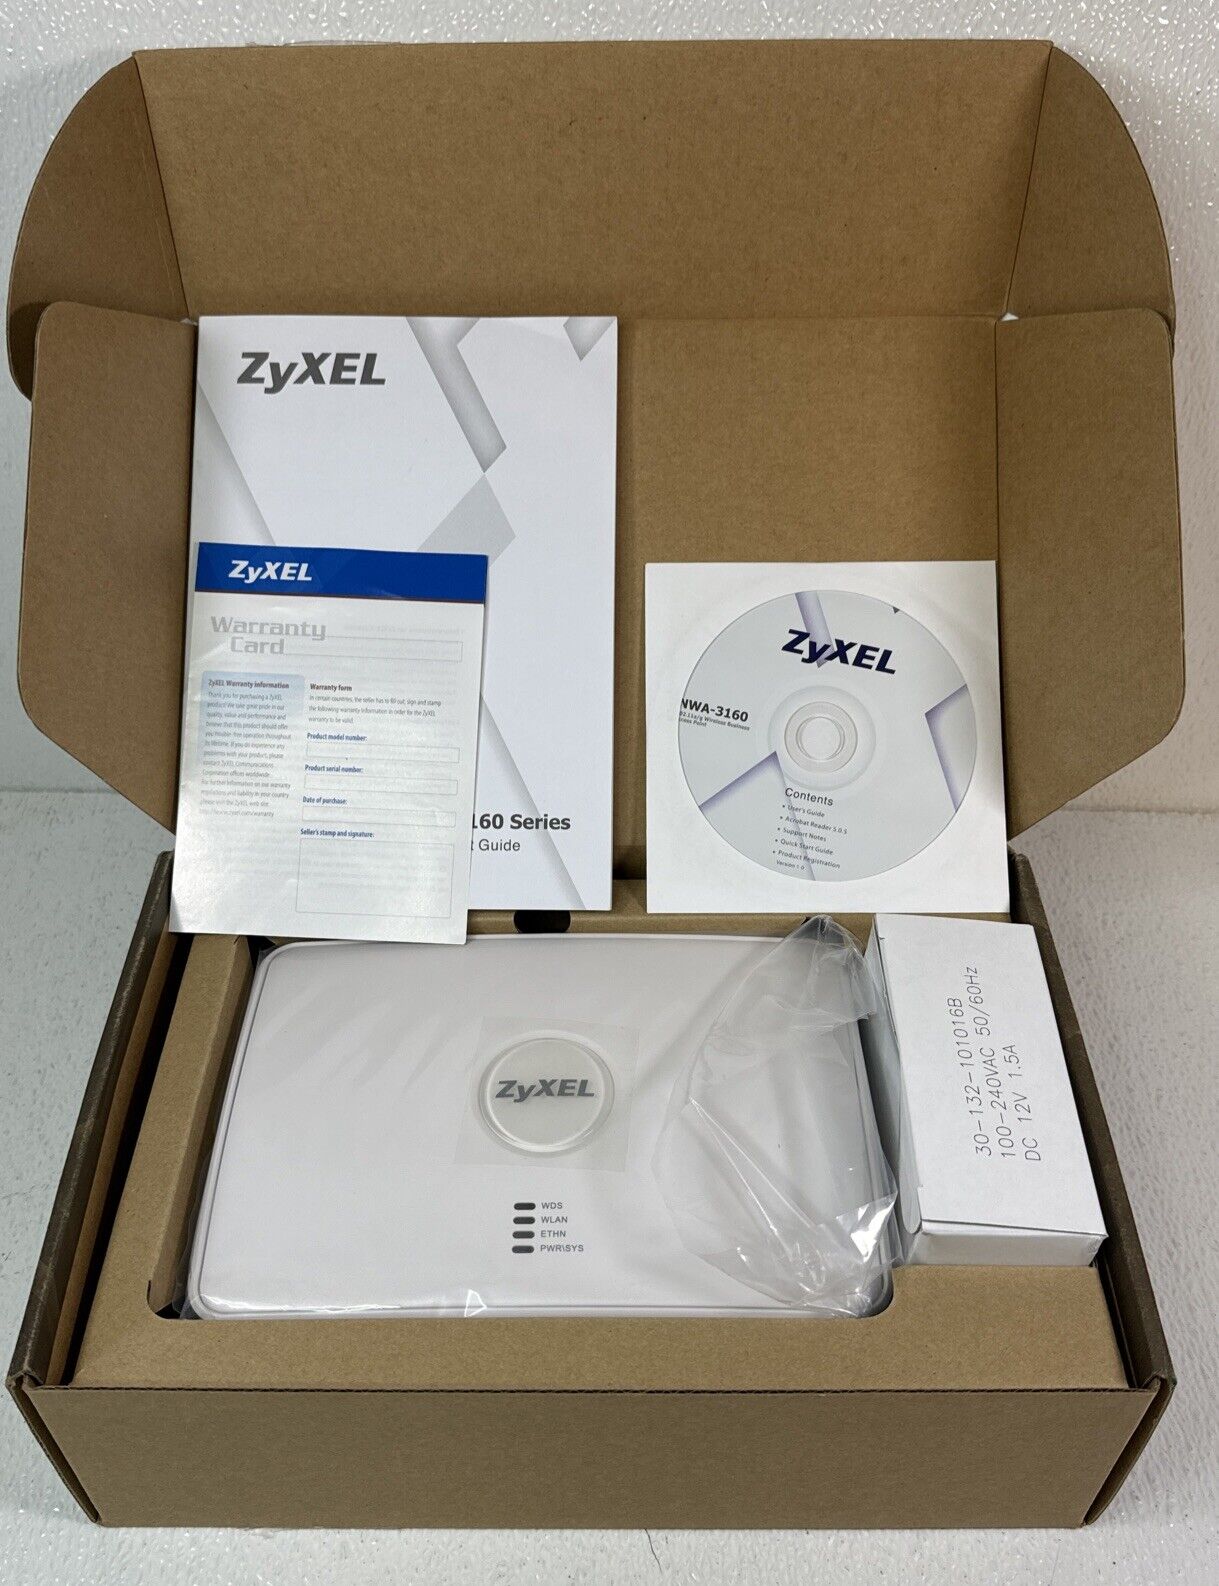 Zyxel NWA-3160 Wireless 54 Mbps Dual-Band Hybrid Ethernet Port Access Point NEW 